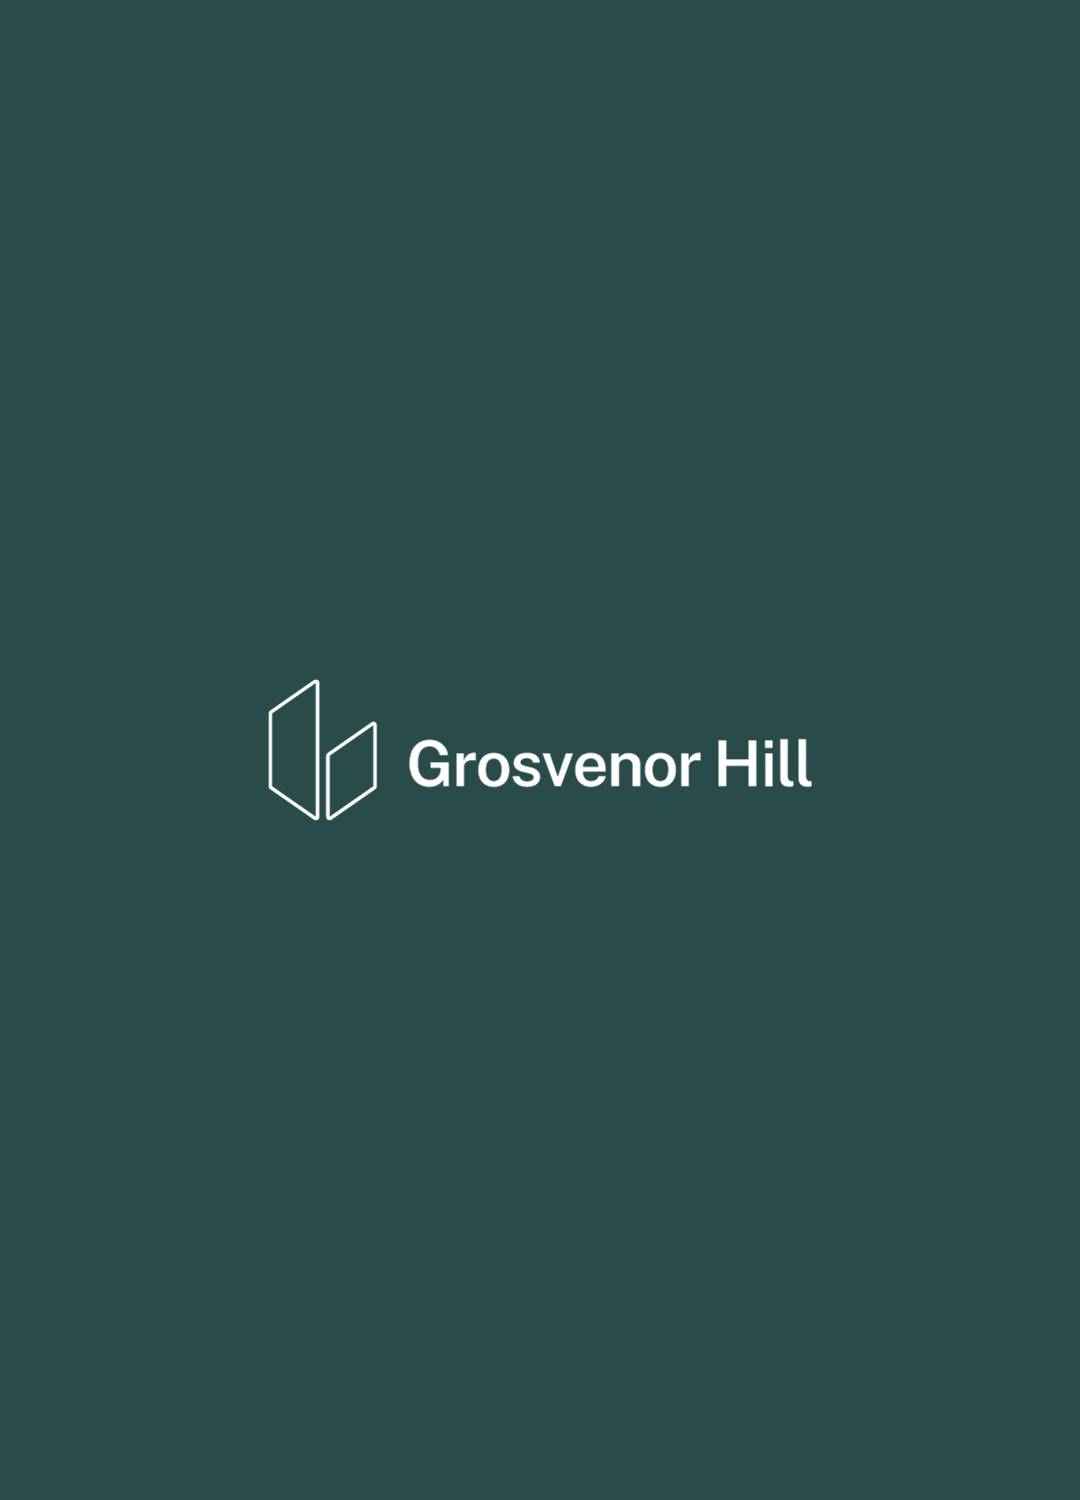 Grosvenor Hill and Amber Fusion